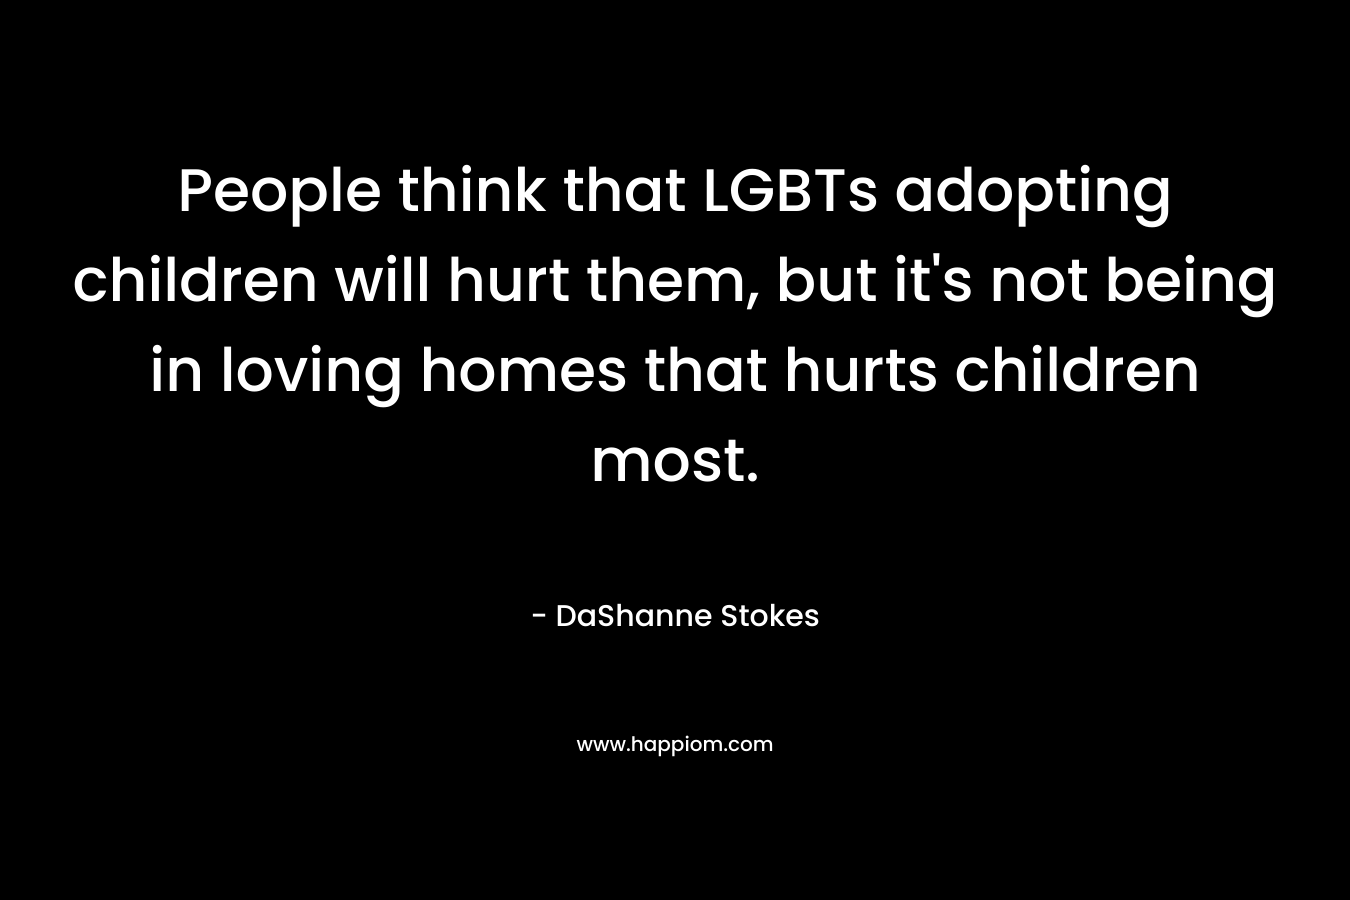 People think that LGBTs adopting children will hurt them, but it's not being in loving homes that hurts children most.